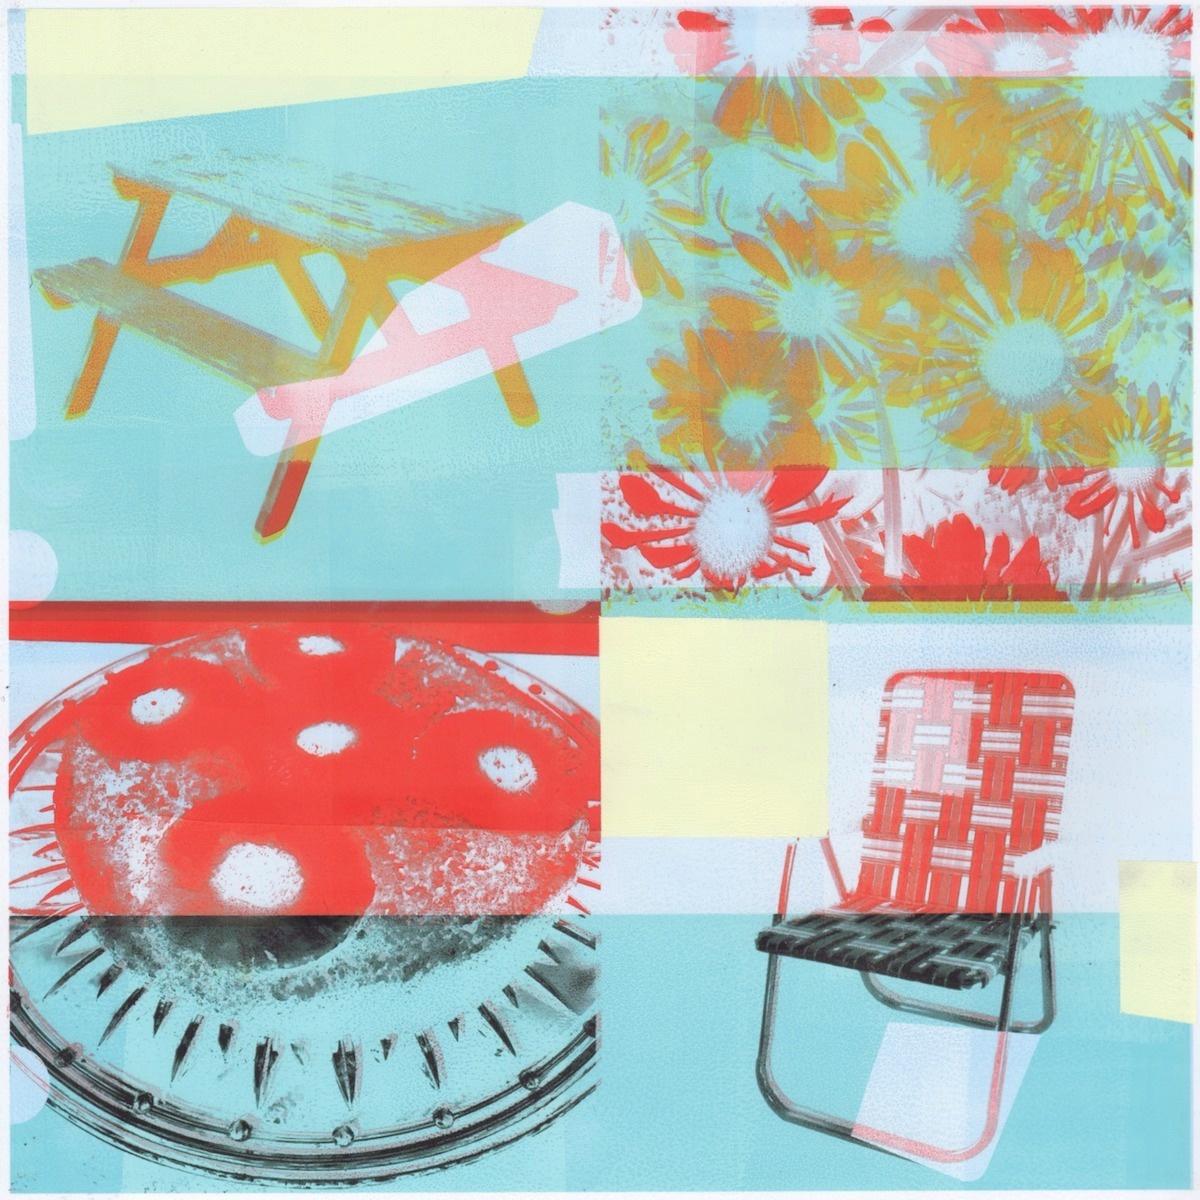 "Picnic", contemporary, flowers, cake, red, yellow, blue, print, mixed media - Print by Patty deGrandpre